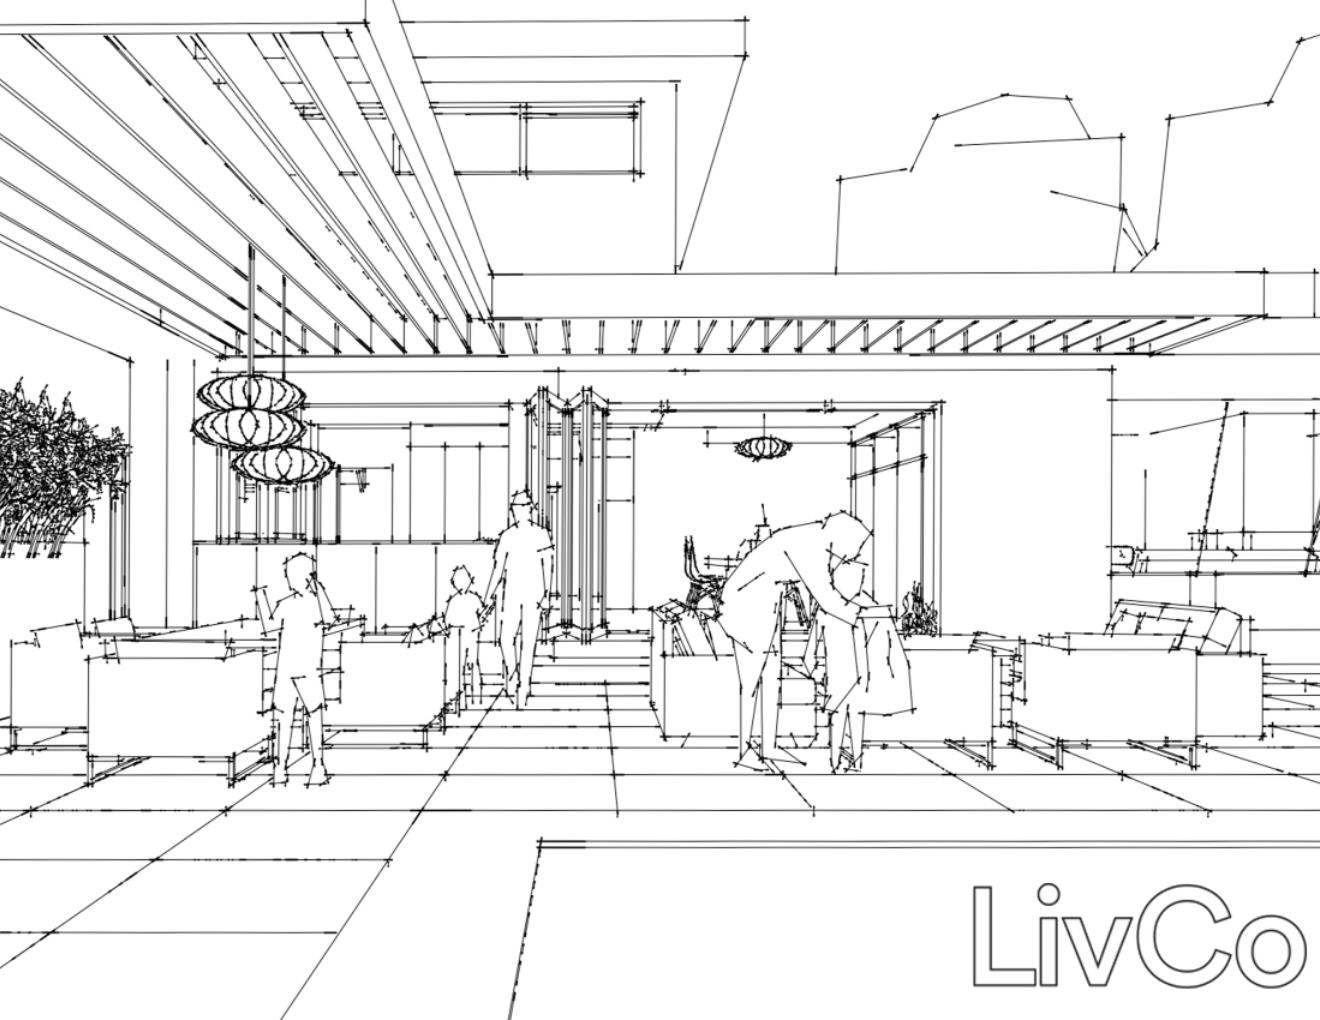 Perspective line drawing of people in outdoor space with trellis style ceiling over portions of the space